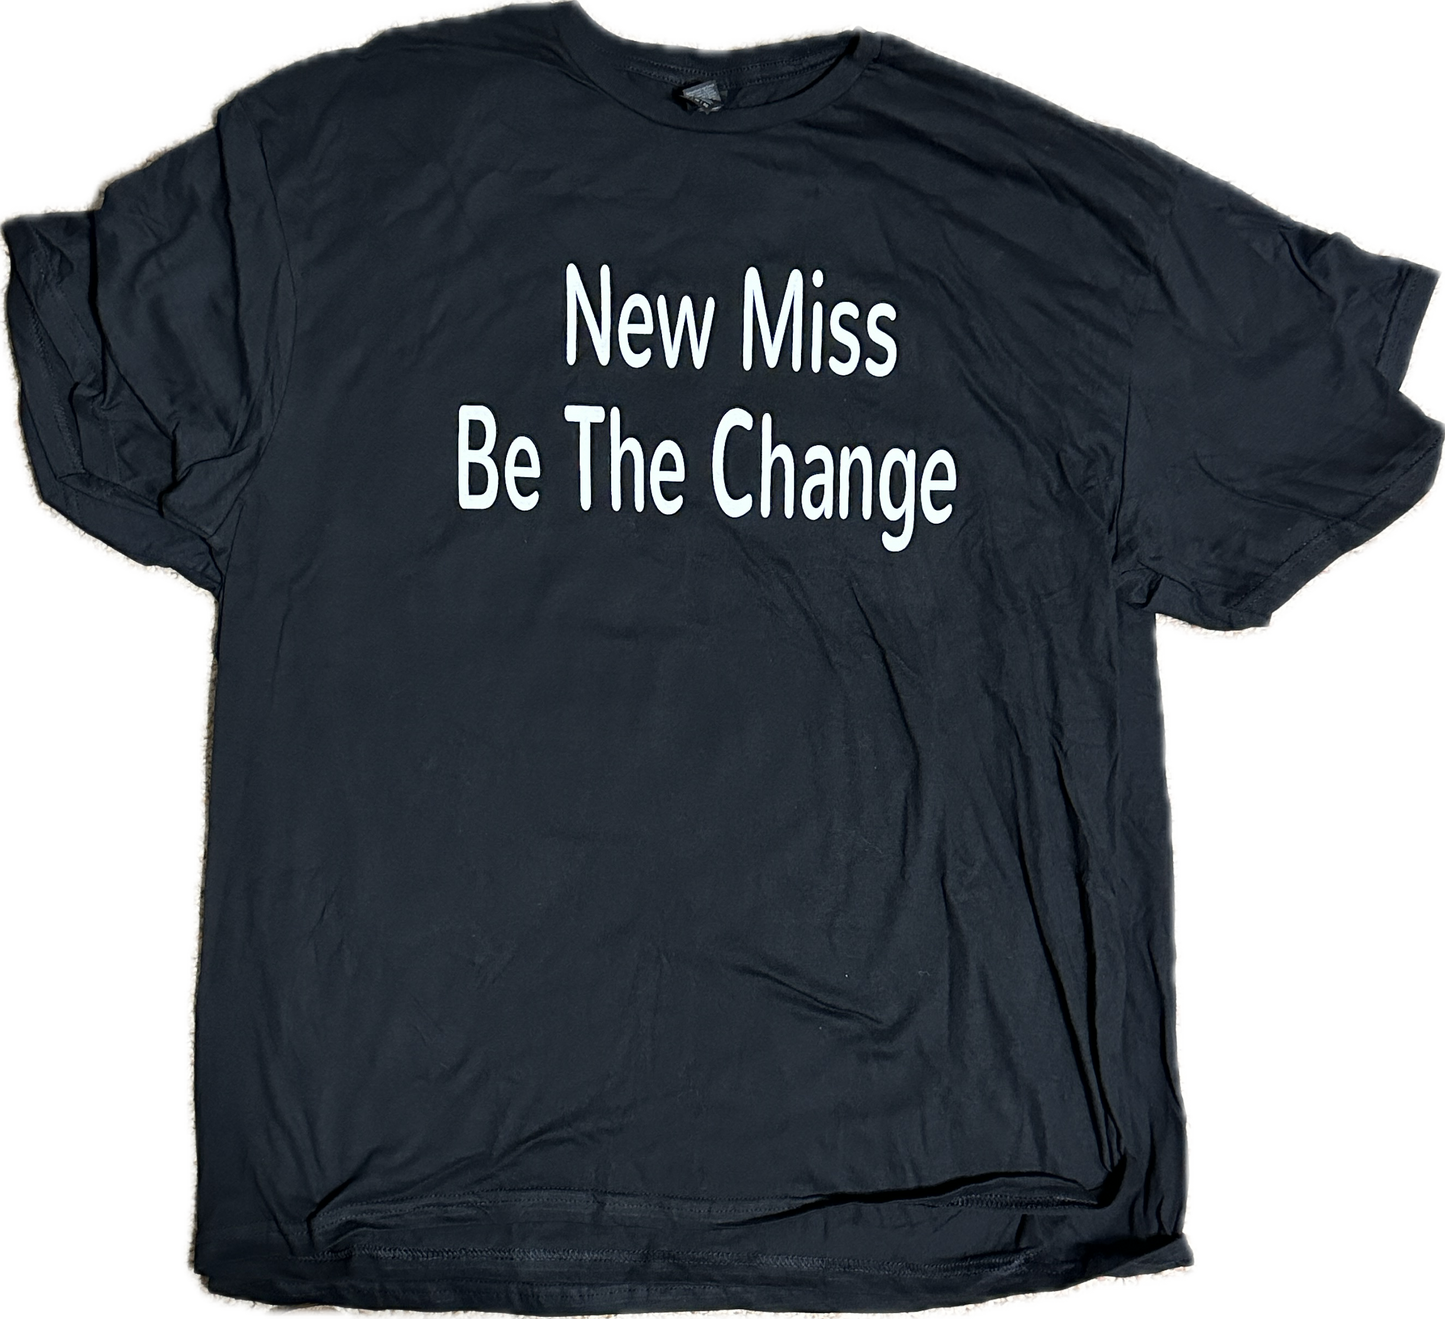 Limited Edition "New Miss Be The Change" Black short- sleeve T-shirt (soft BLOCK LETTERS- mid size on front)